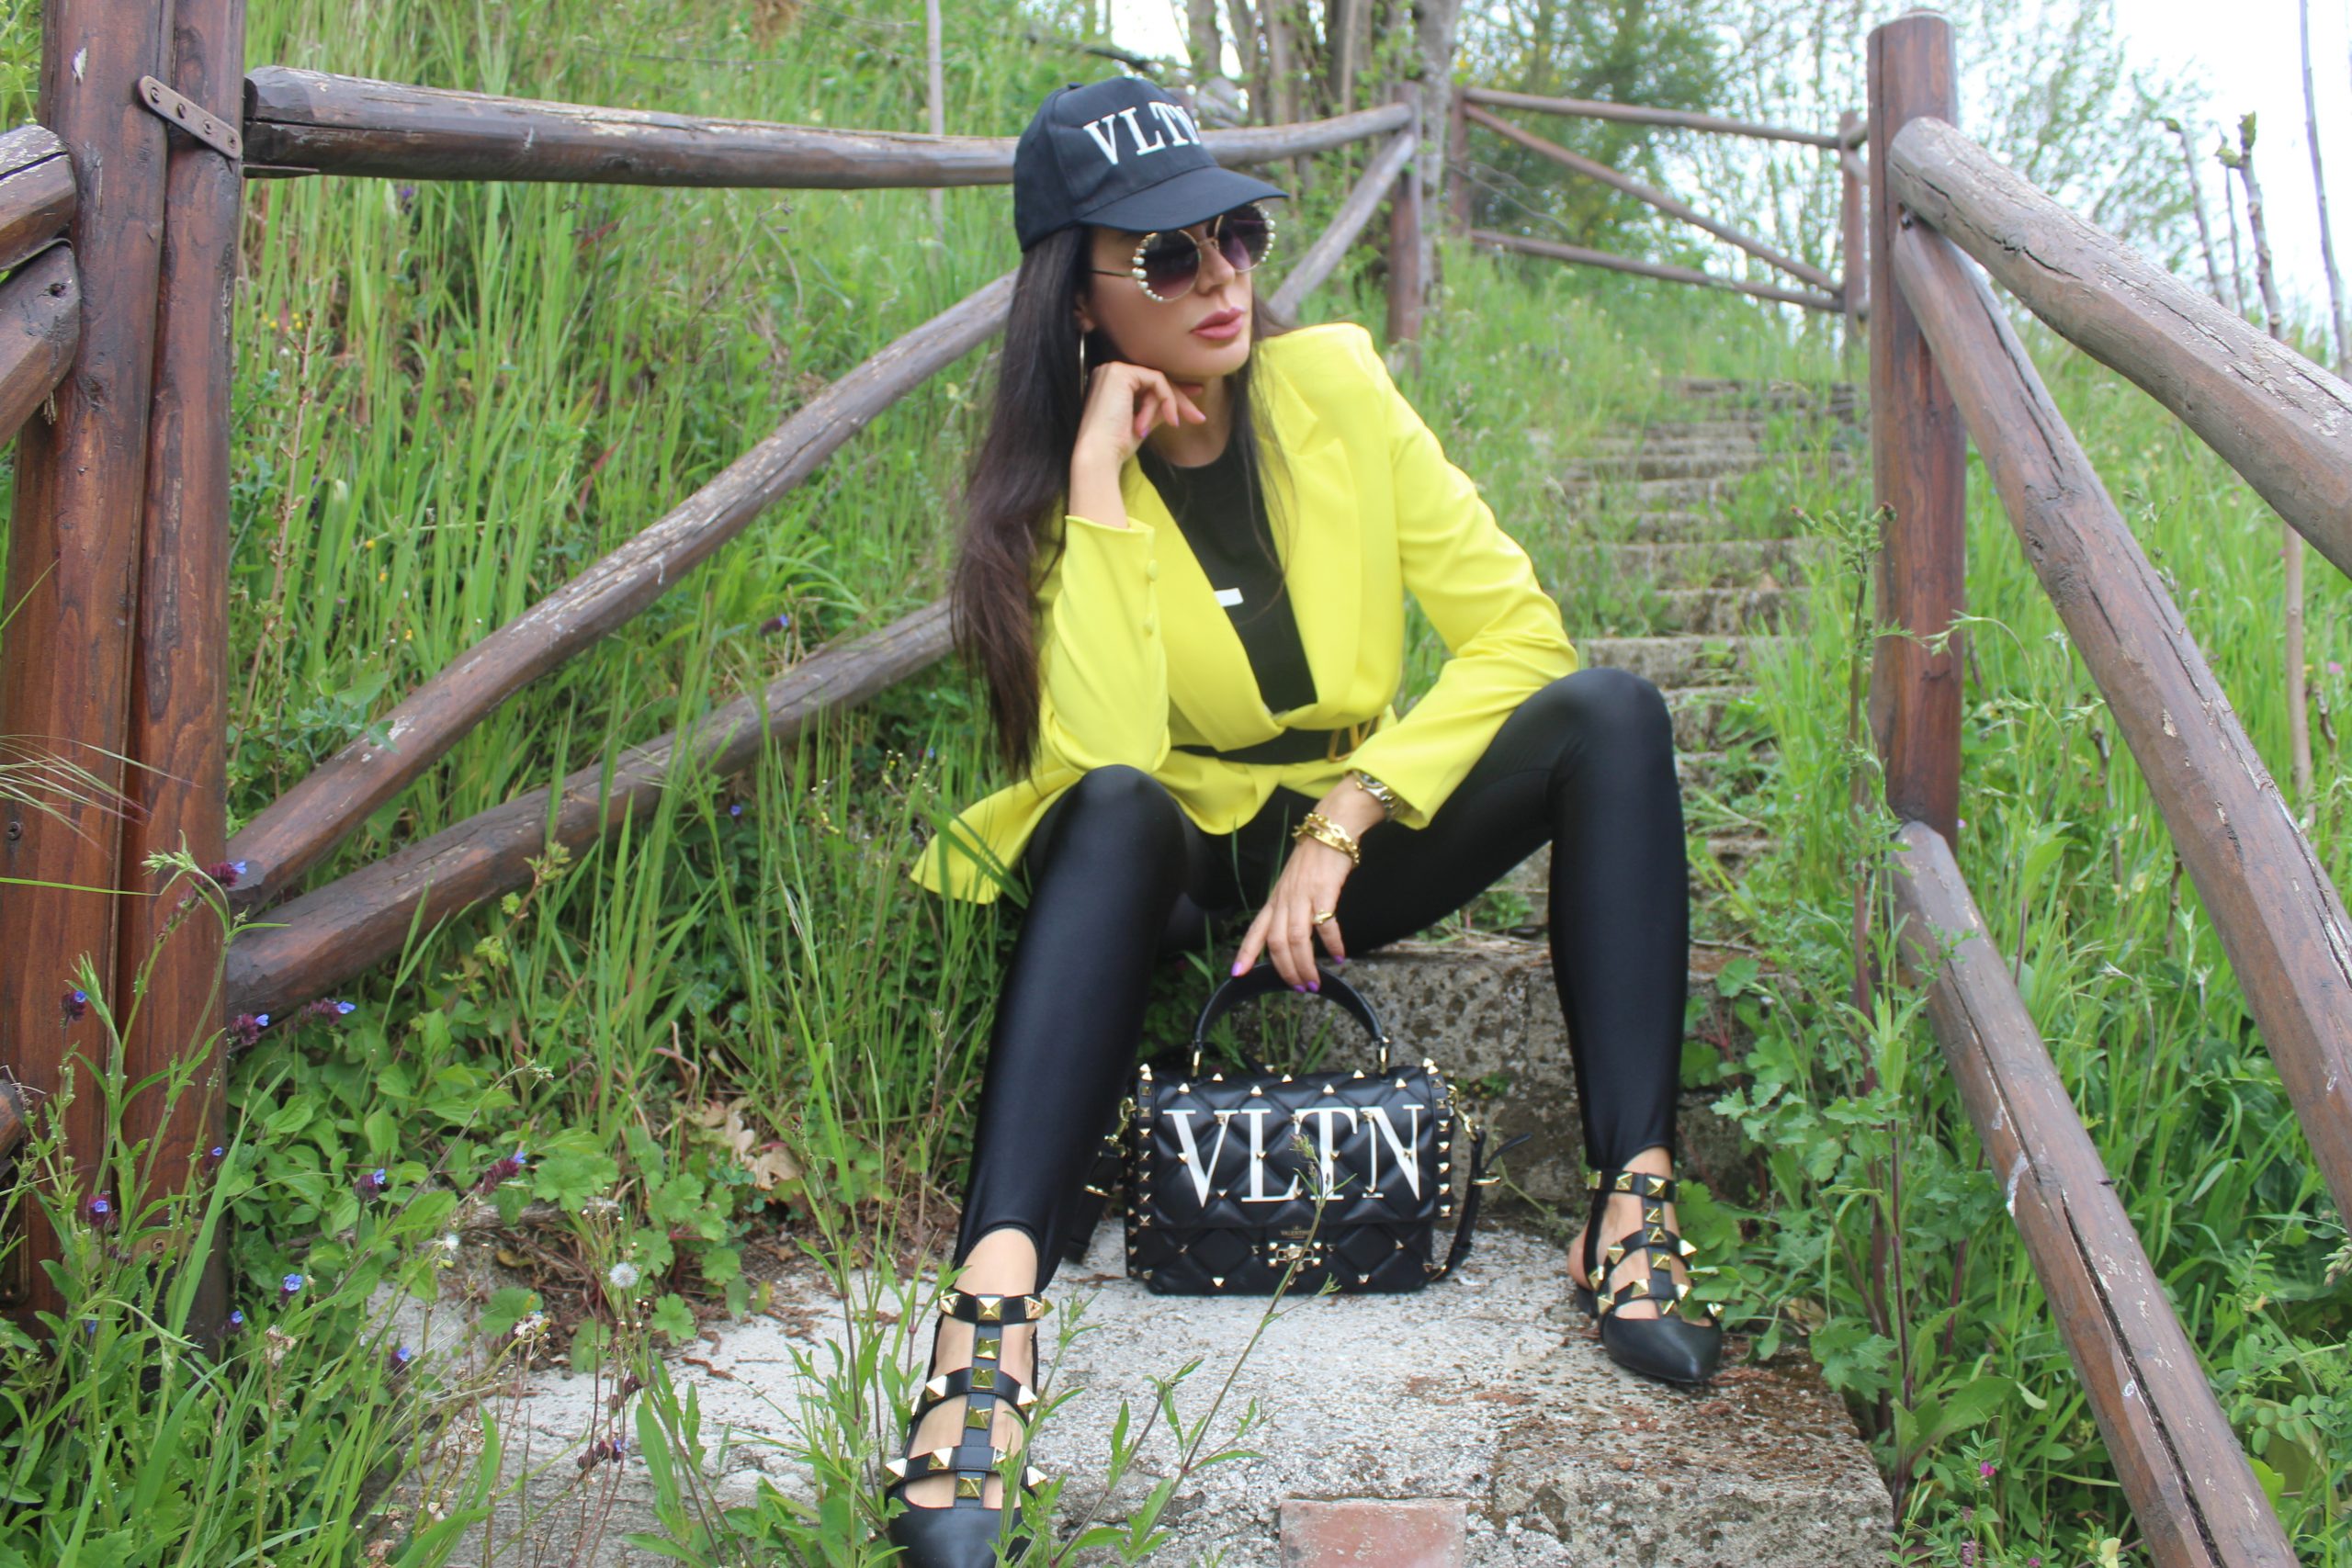 Tailored Jacket Yellow and Black Trend Valentino Accessories Paola Luretano